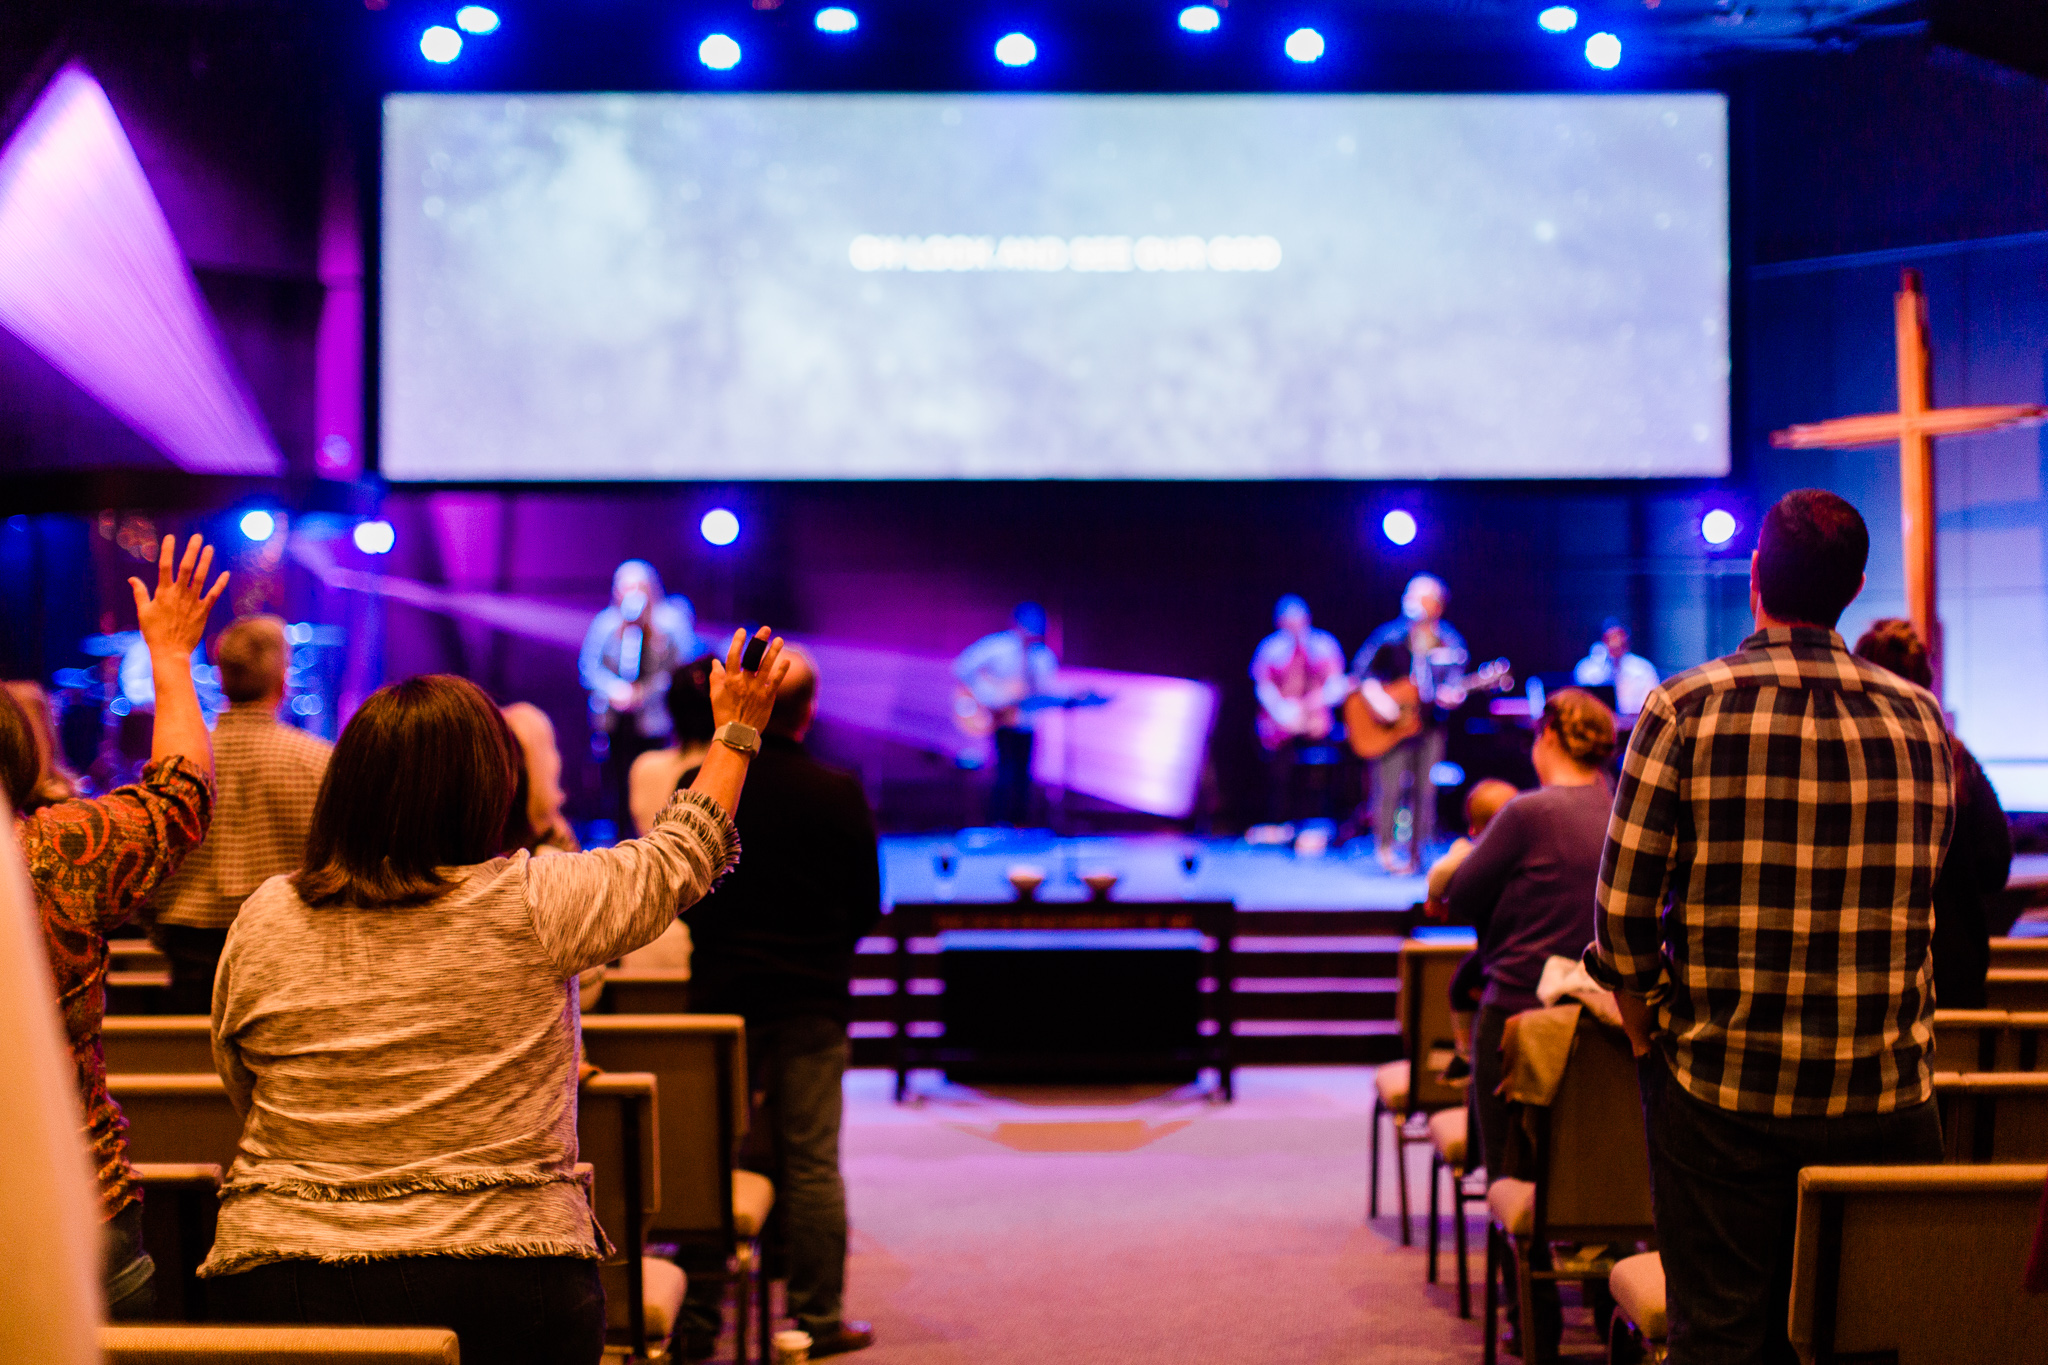 God uses habits and practices, inside and outside the church, to shape our worship